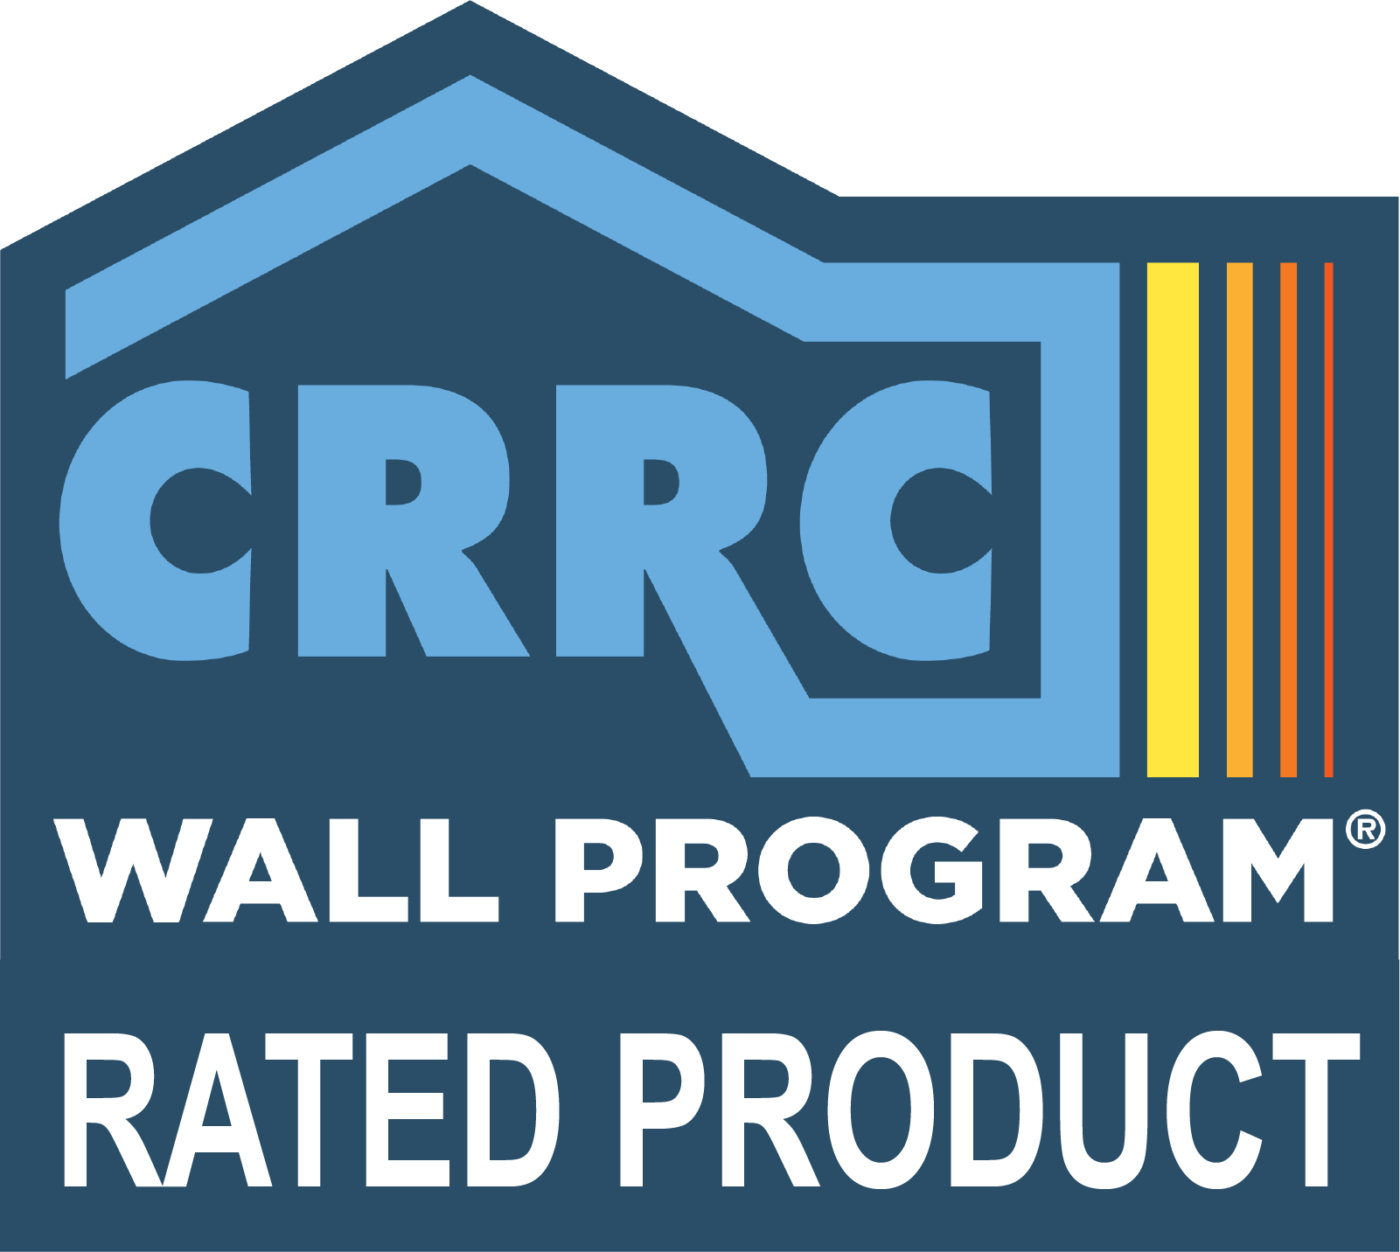 CRRC Rated Wall Product Logo Final Color